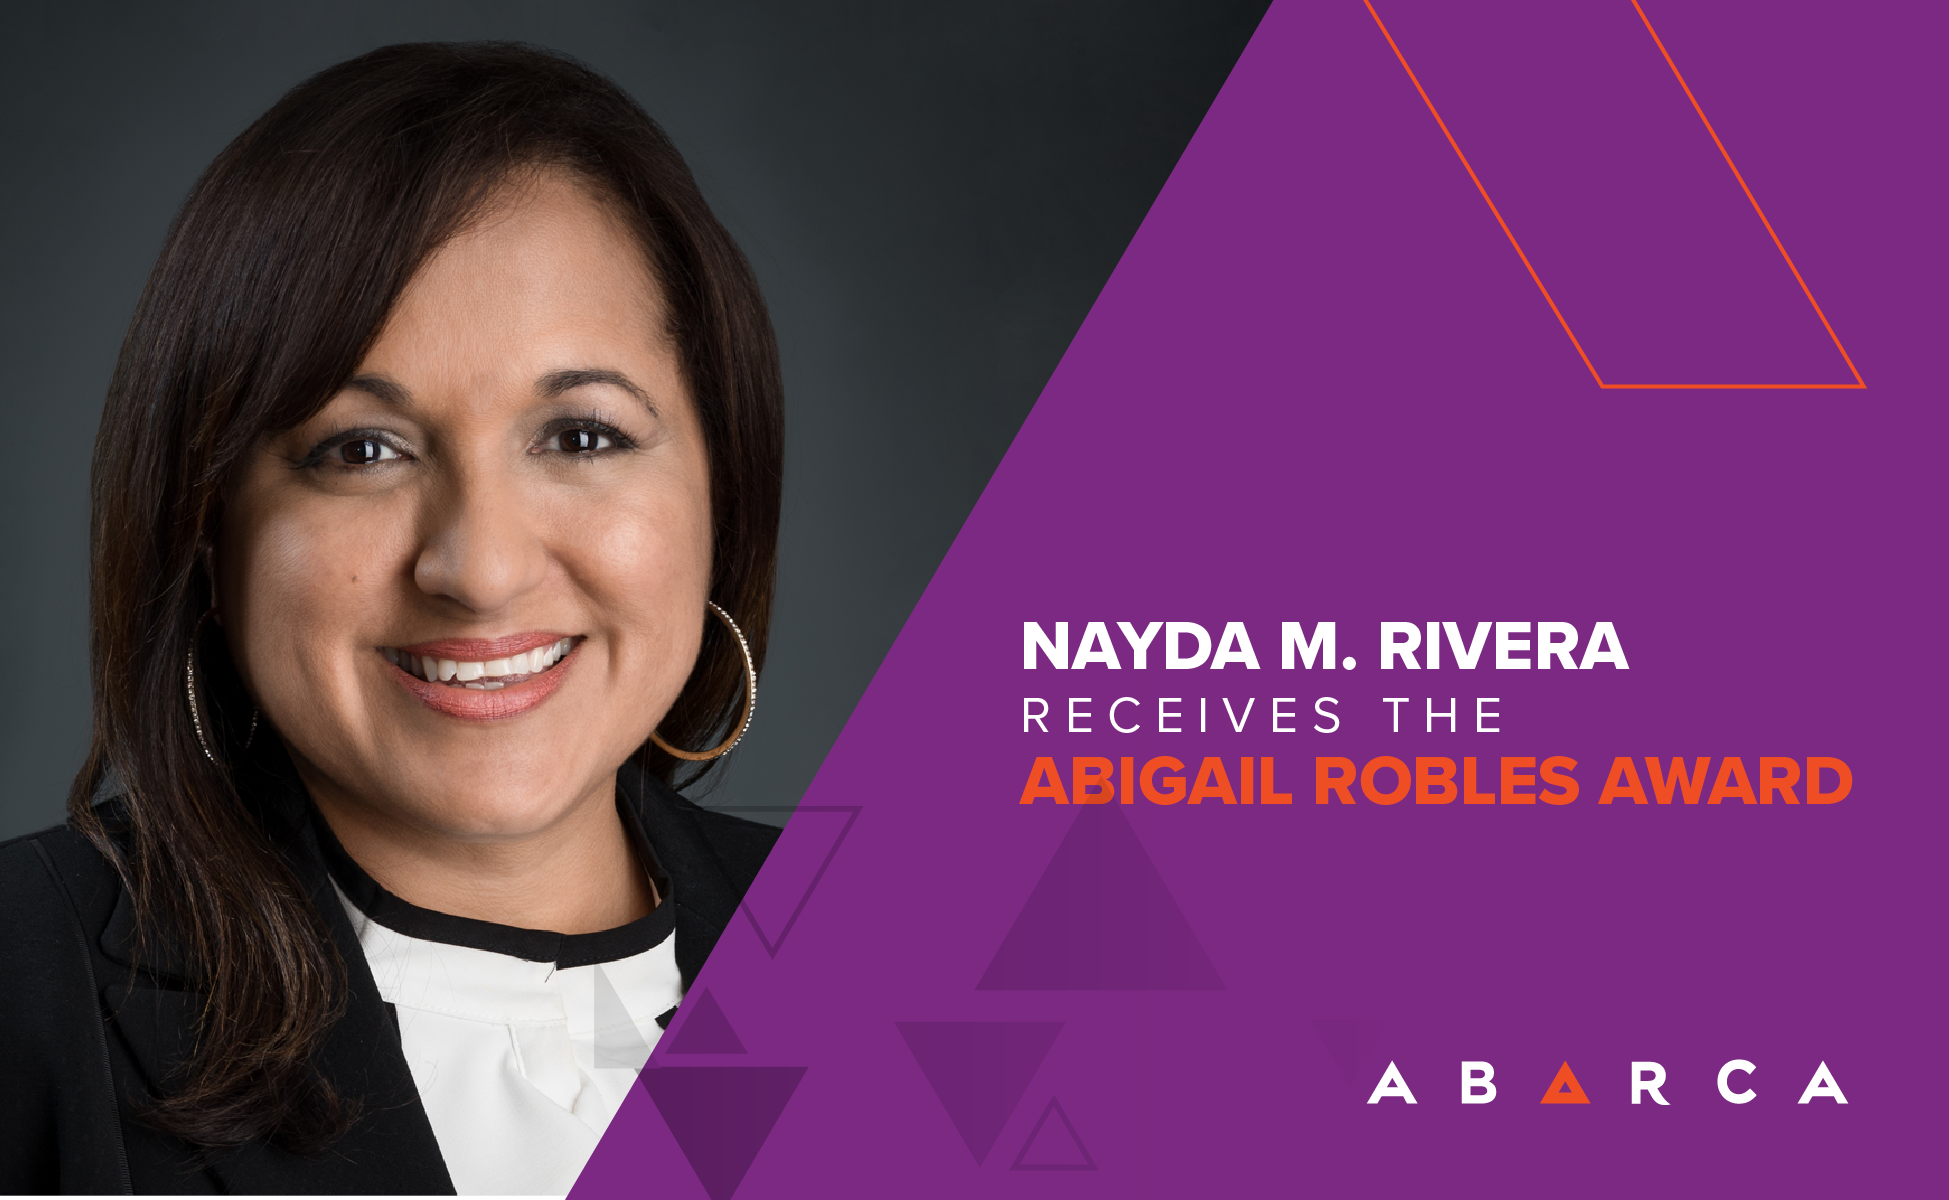 Abarcan Nayda M. Rivera receives the Abigail Robles Award